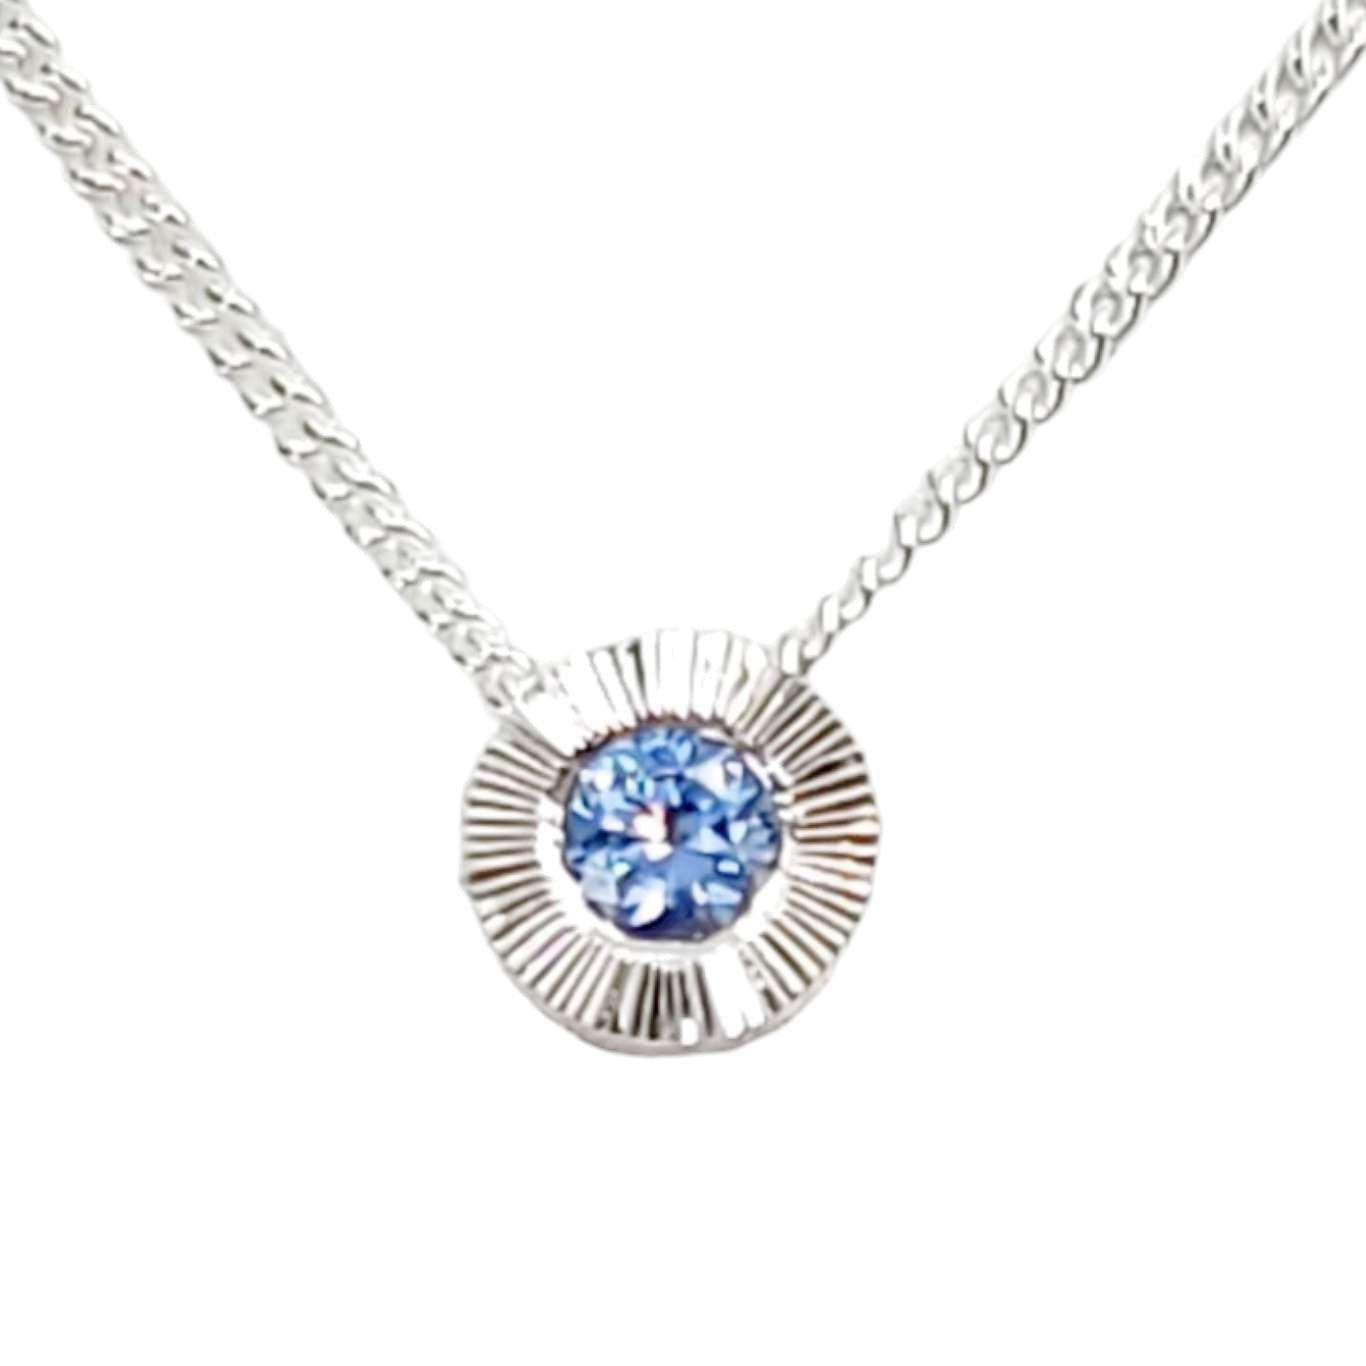 Necklace - Small Aurora in Blue Sapphire and Sterling Silver by Corey Egan